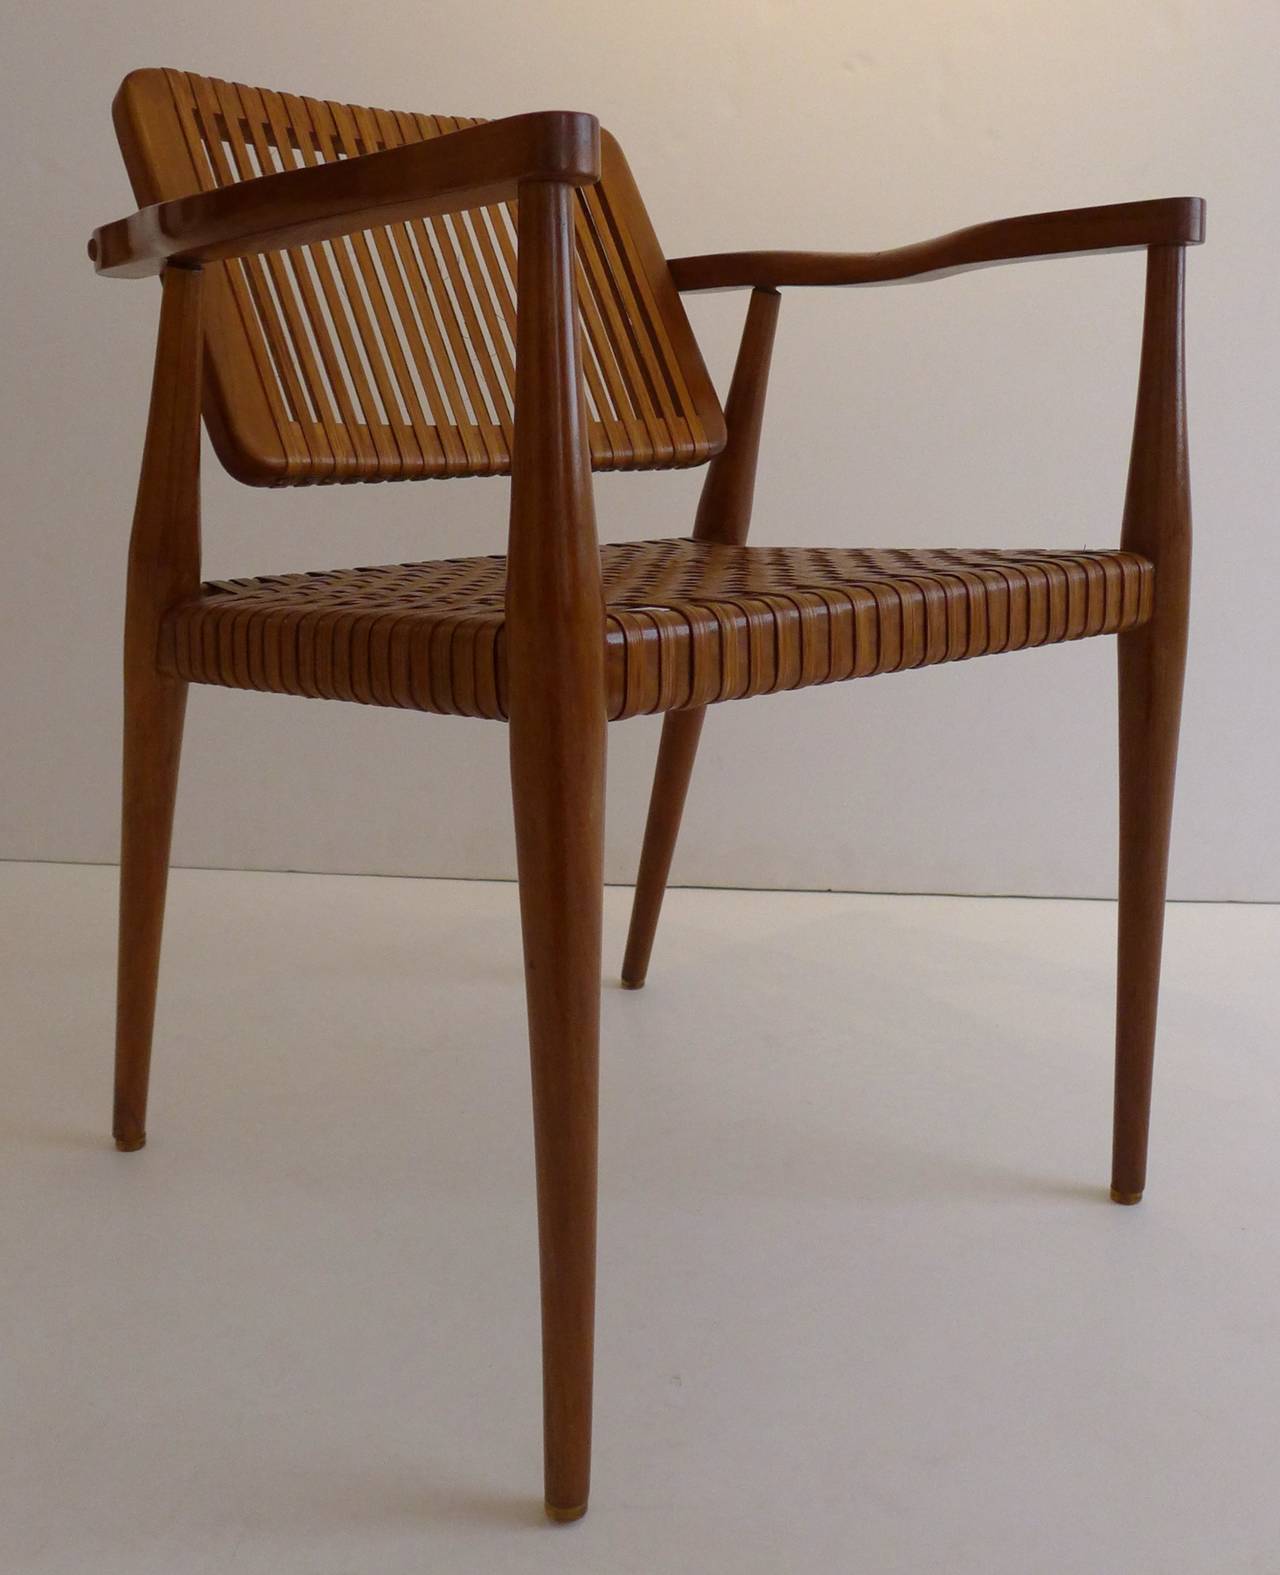 Carved Set of Four Chairs by Marcel La Riviere for Ficks Feed